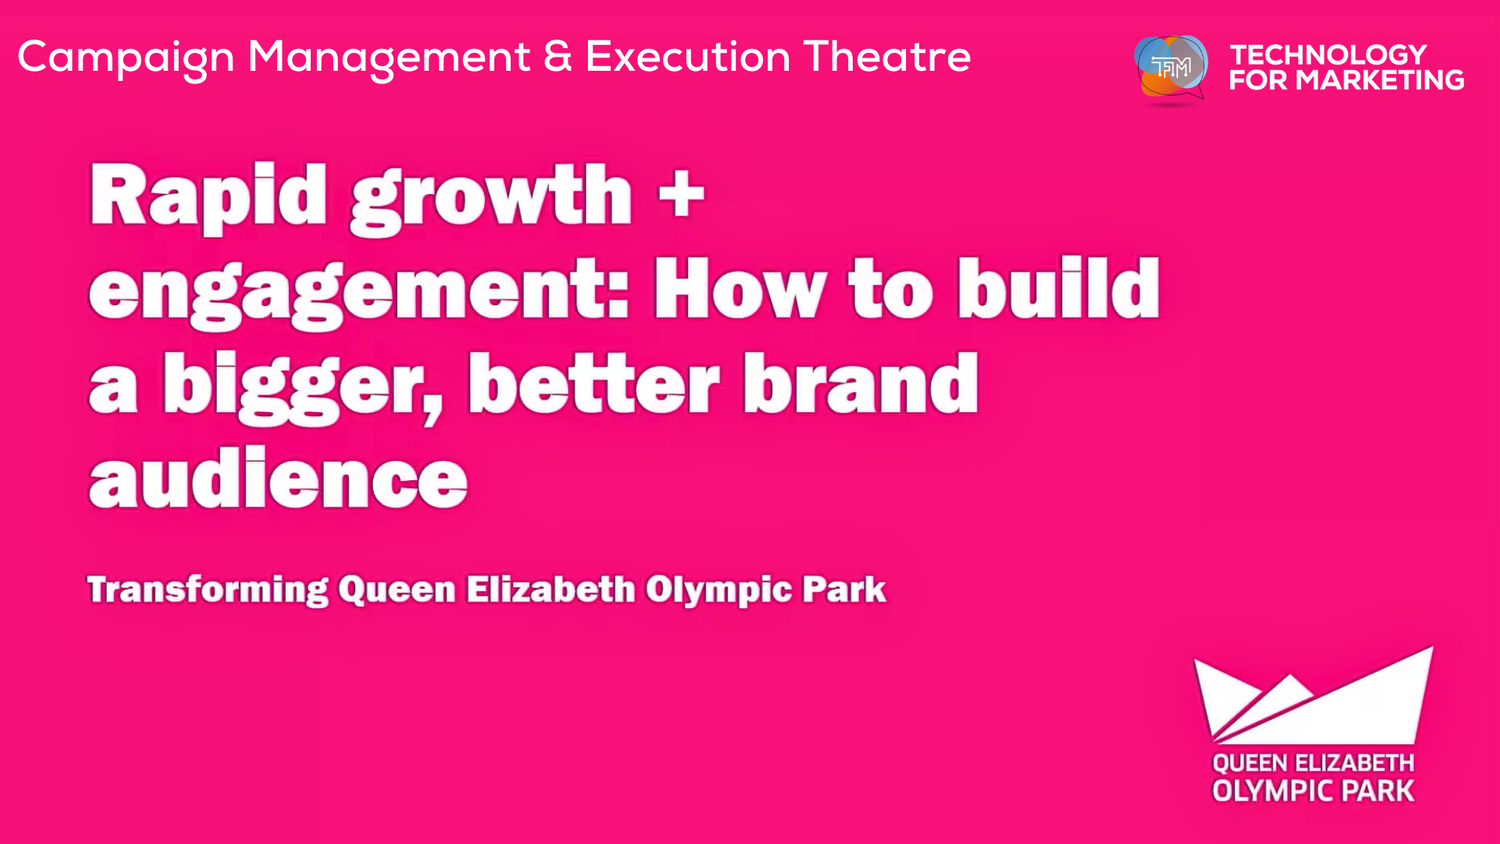 Rapid growth + engagement: How to build a bigger, better brand audience